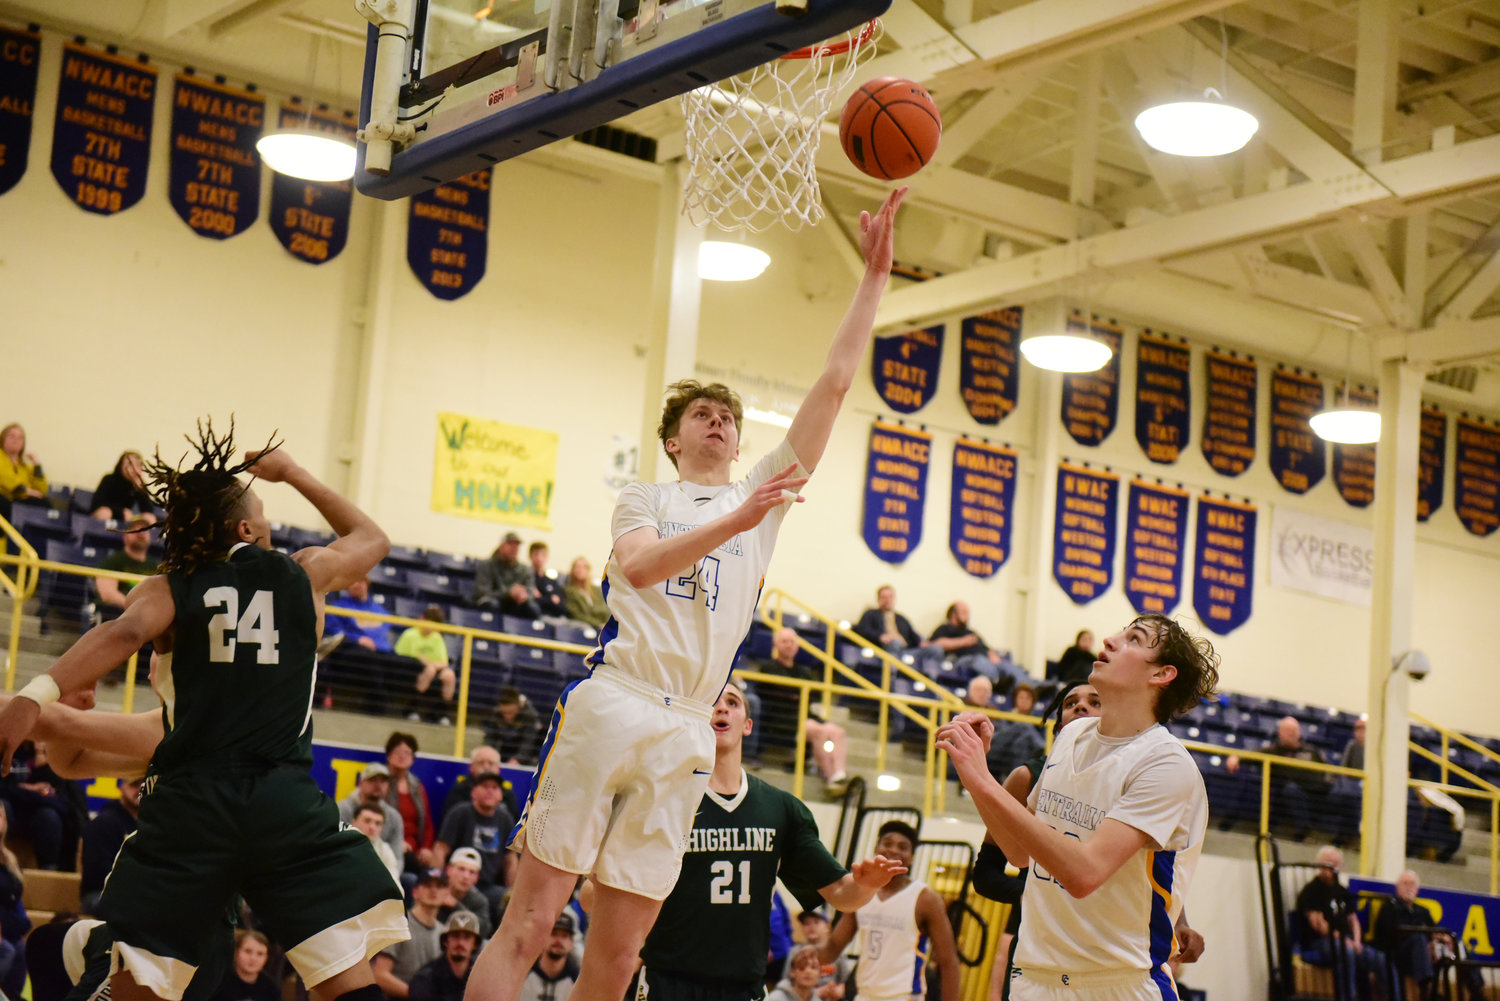 Centralia's Michael Adams goes up for a shot against Highline Saturday.